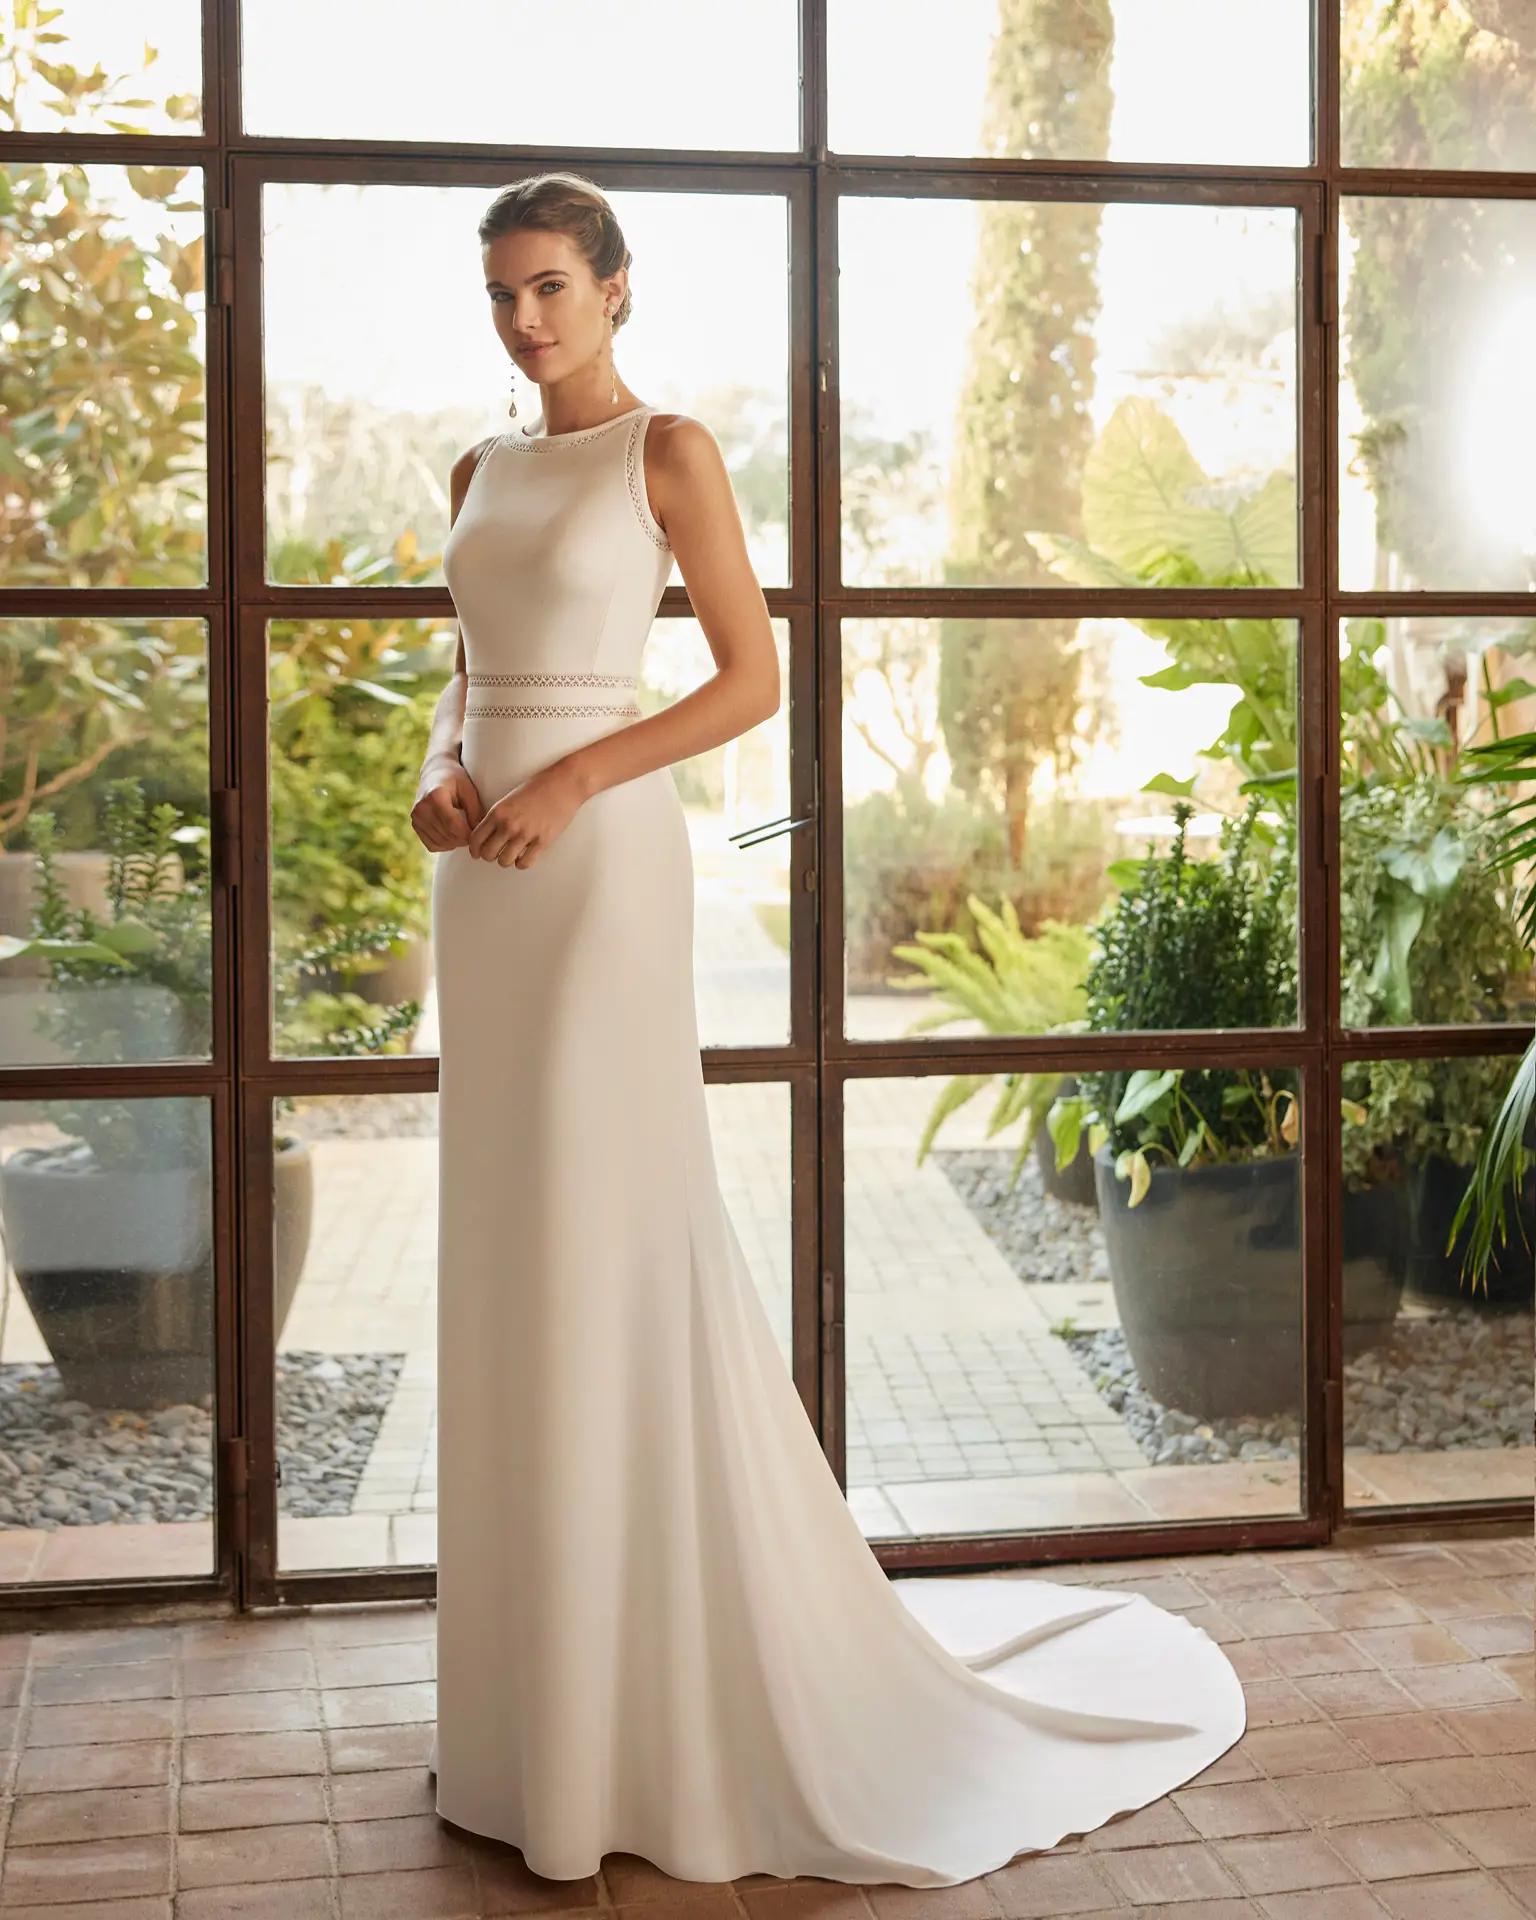 Danesa wedding dress with high neck and sleeveless bodice and fitted skirt by Rosa Clara in Columbus, Ohio